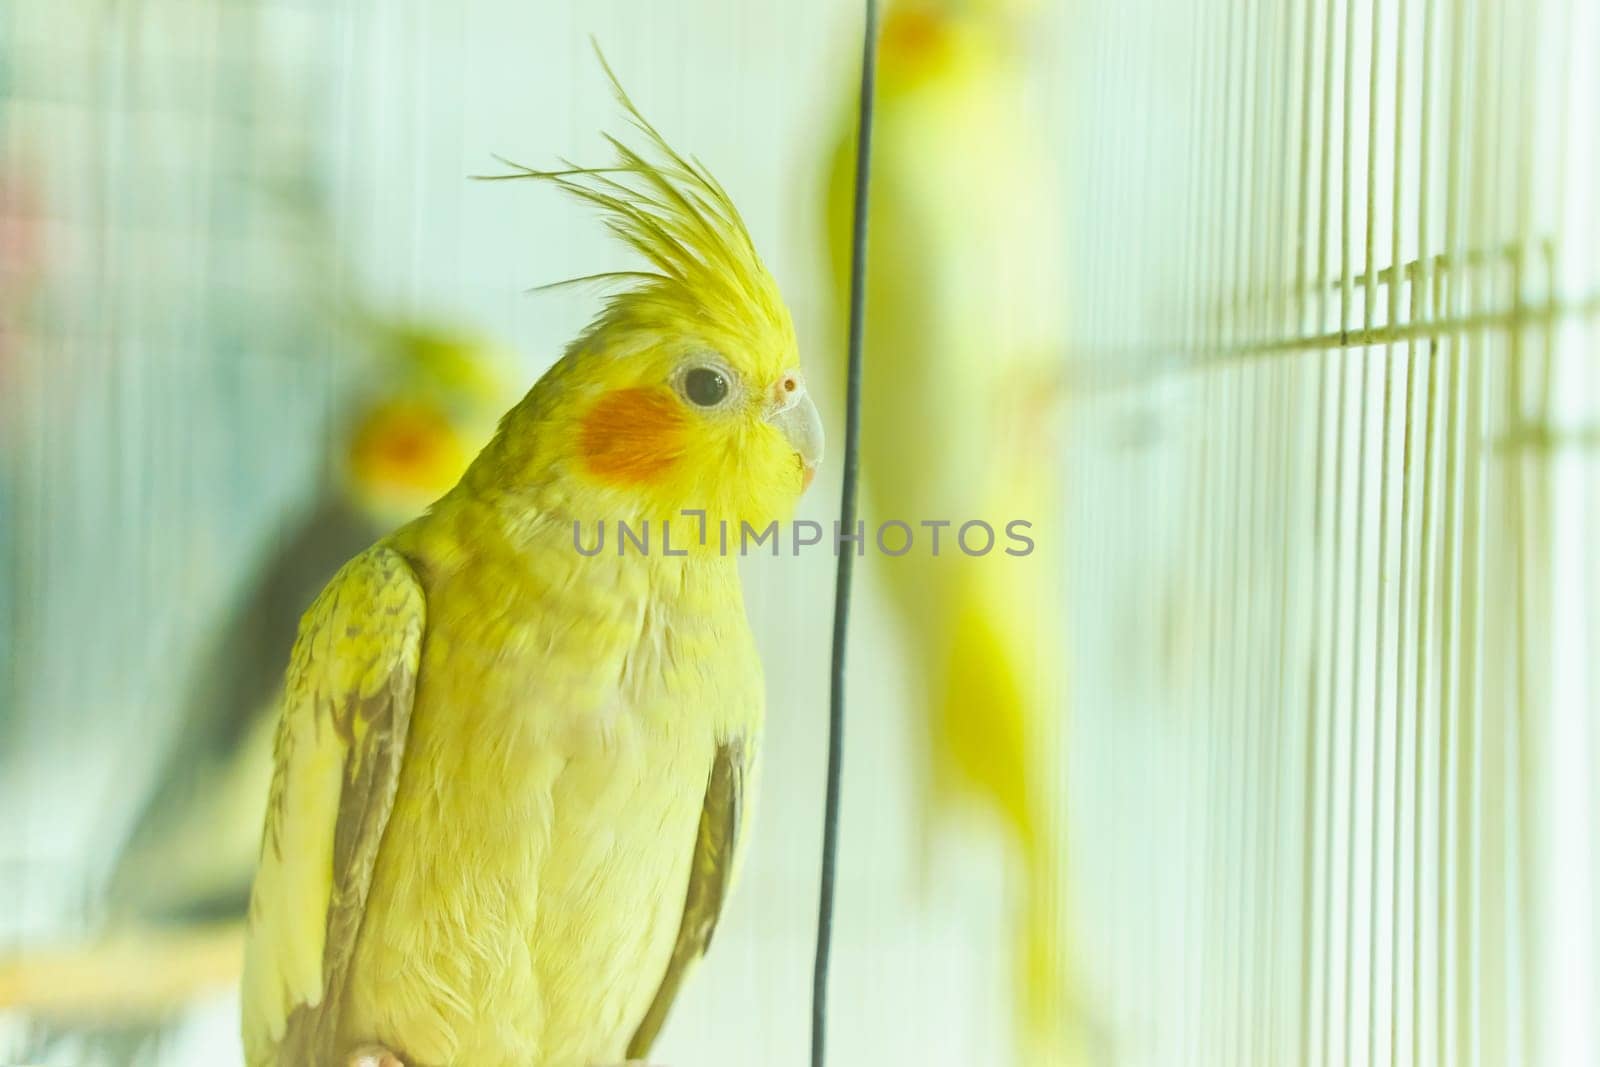 Yellow parrot Corella sitting swinging in a cage next to other birds